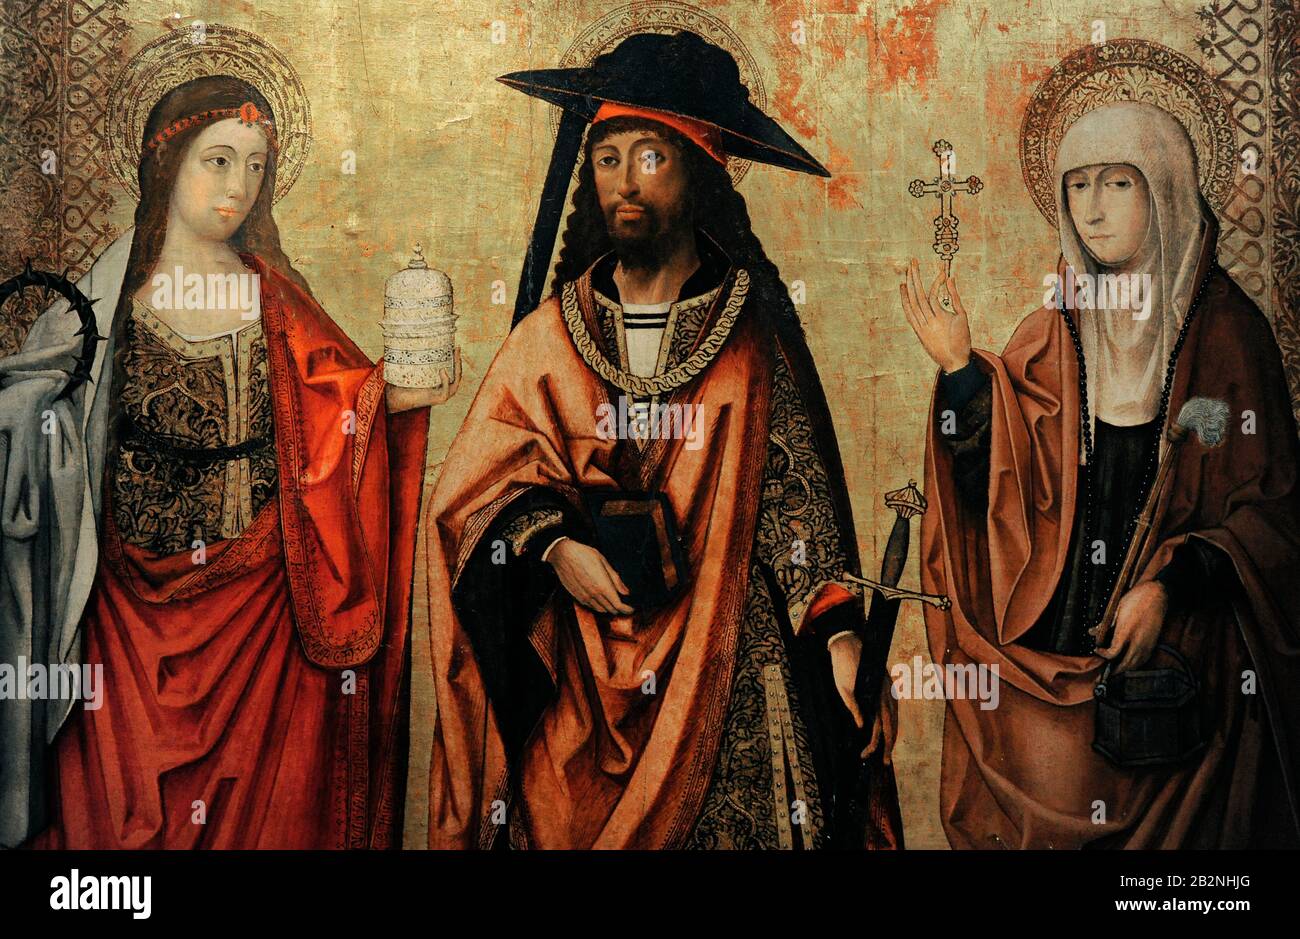 Master of Perea. Saint Lazarus with his Sisters Martha and Mary. Detail. Valencian School, early 16th century. Lazaro Galdiano Museum. Madrid. Spain. Stock Photo